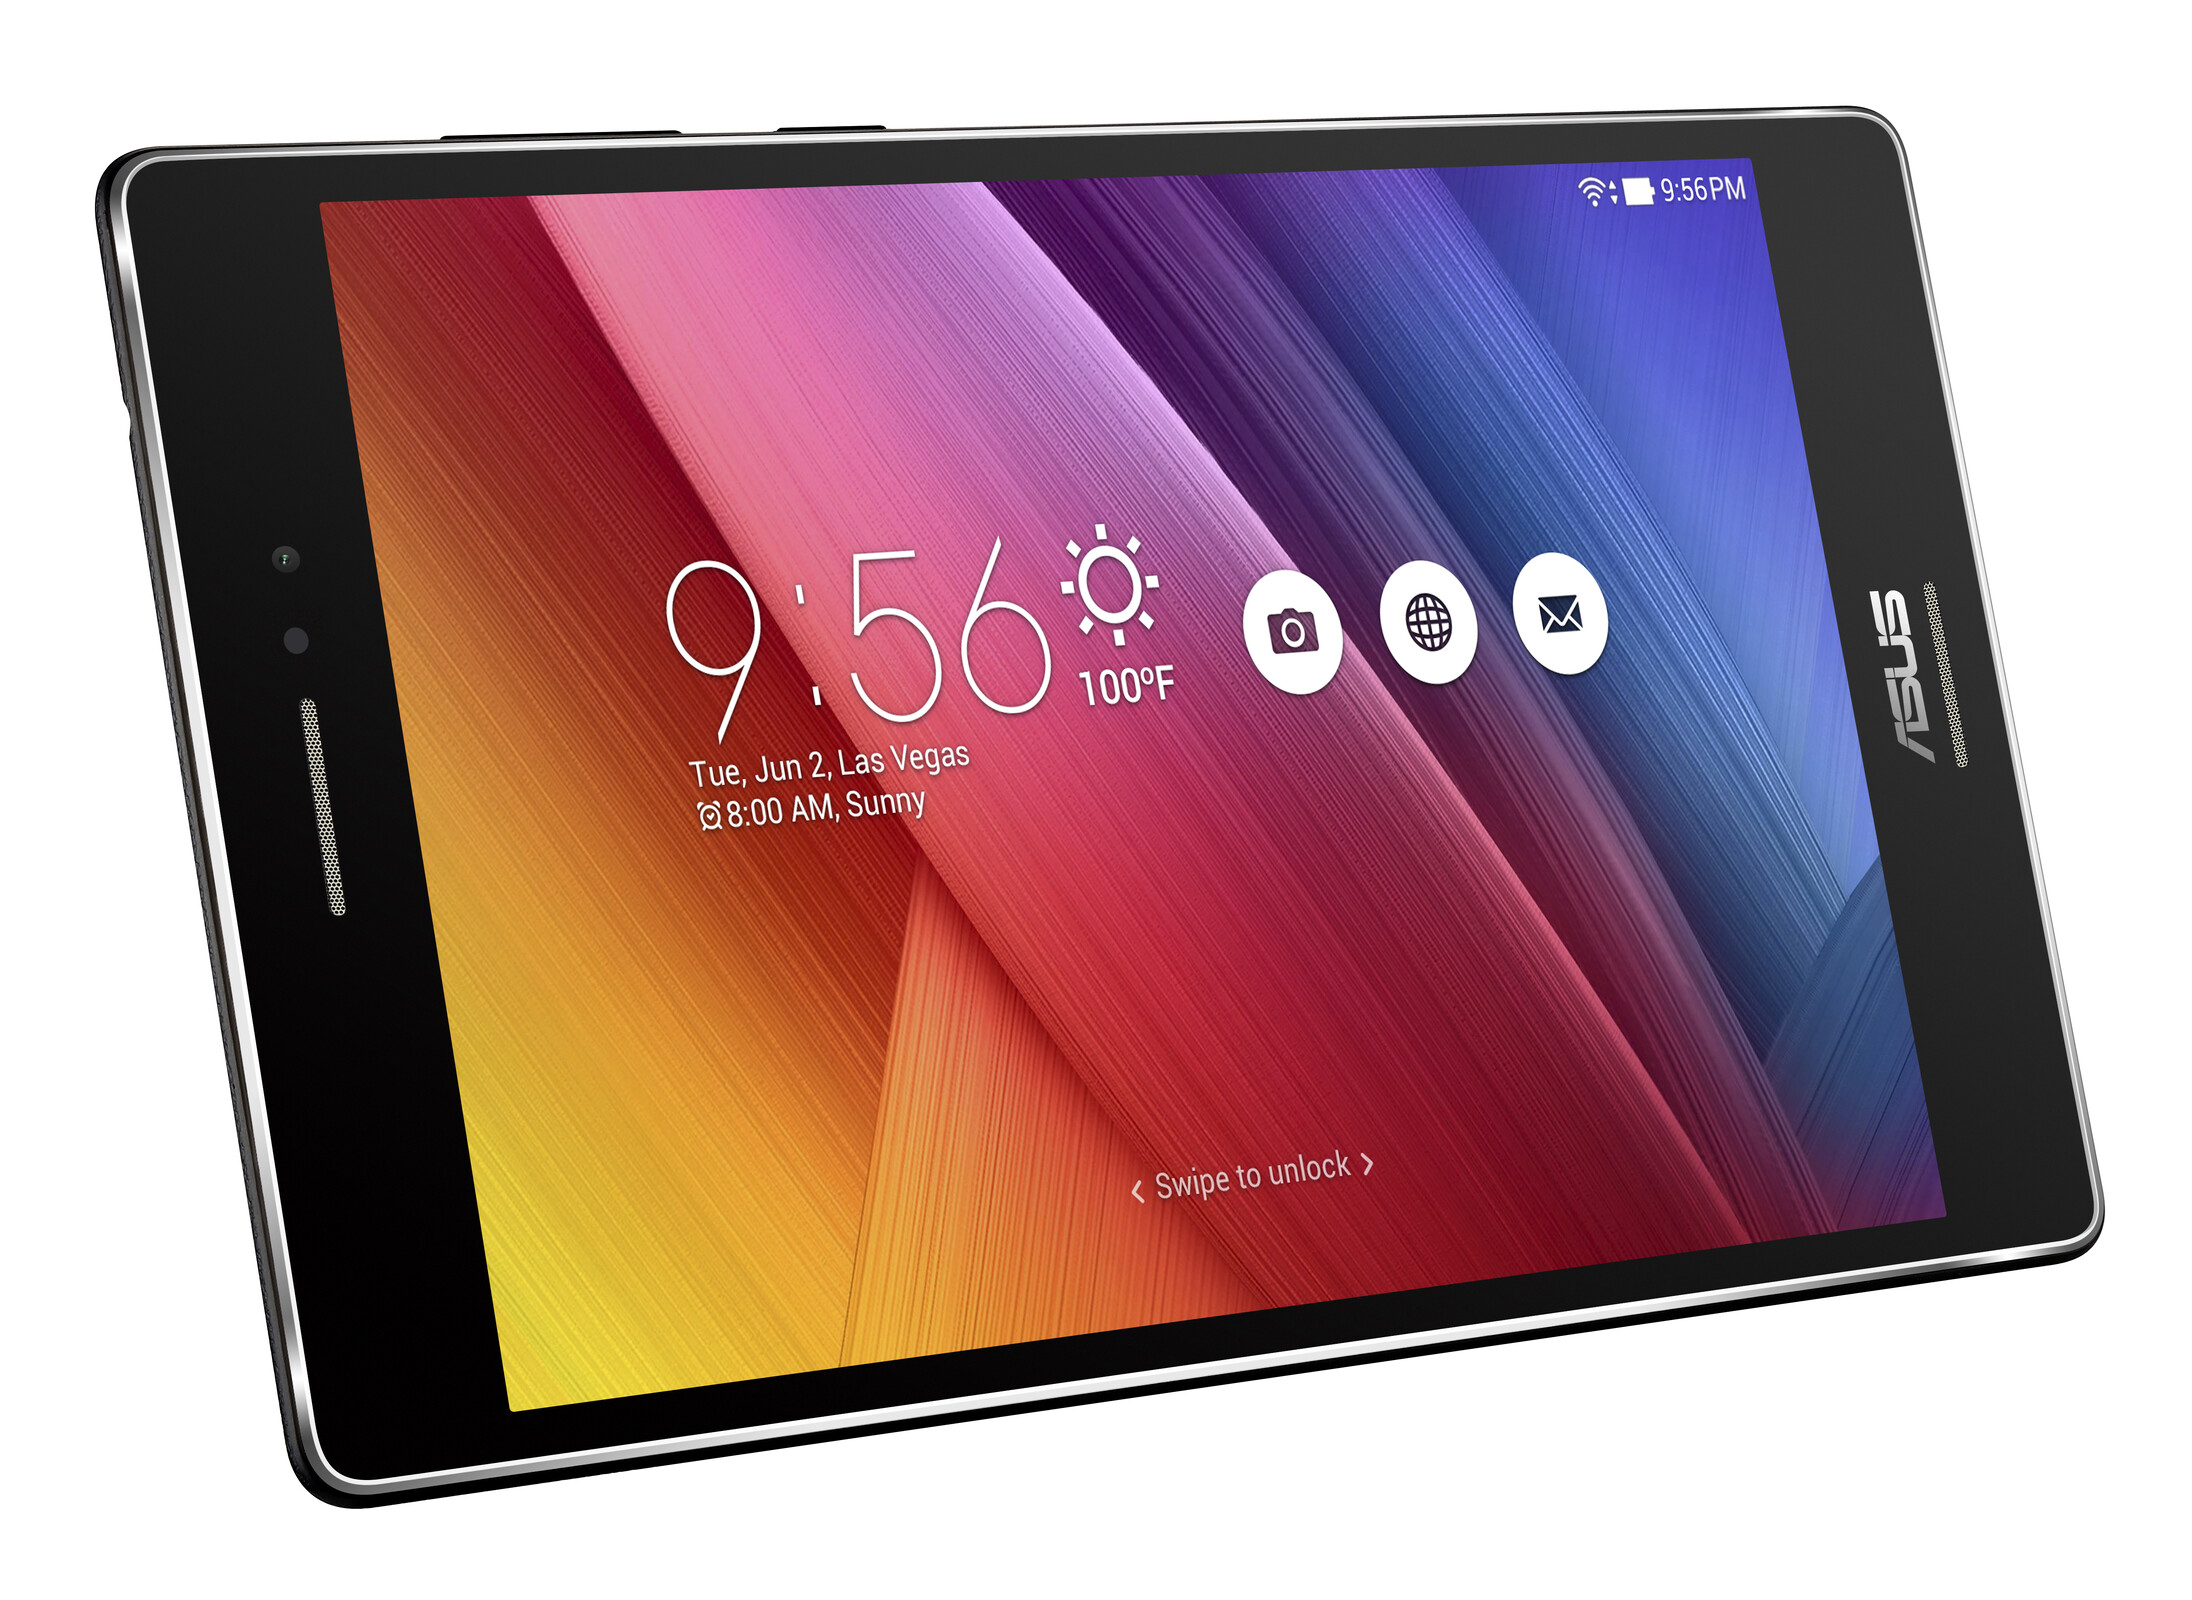 asus zenpad 10 move apps to sd card